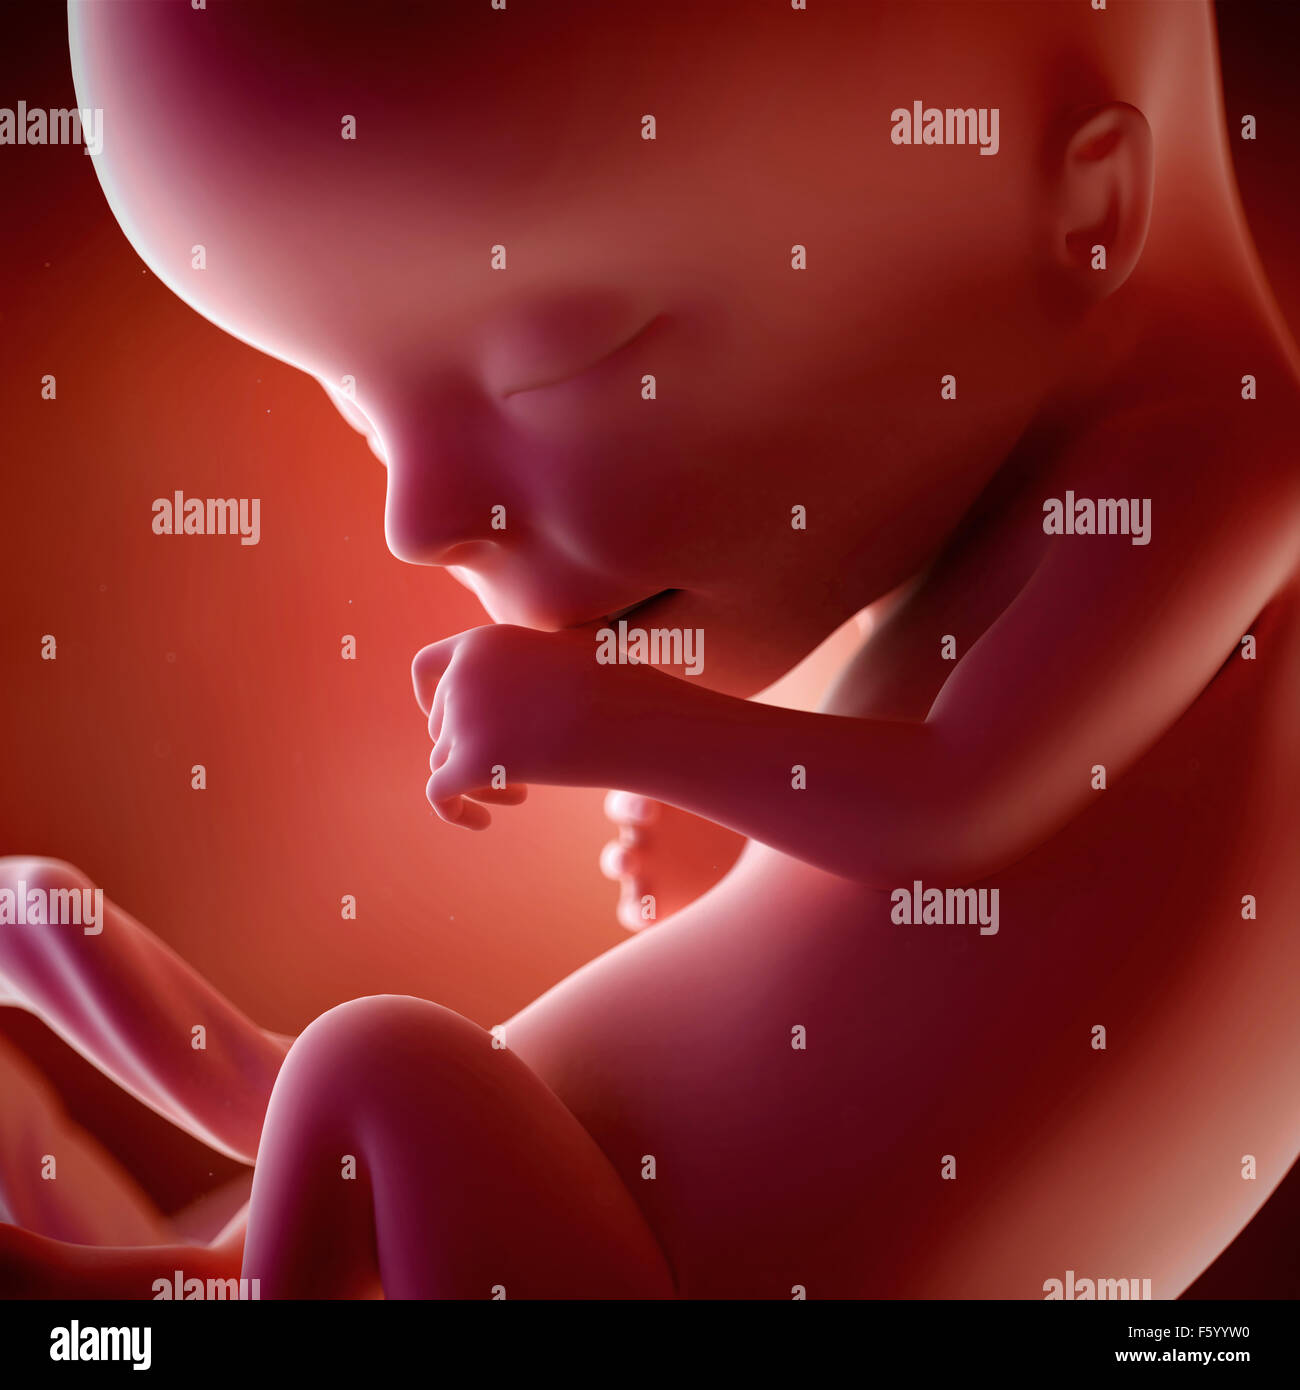 medical accurate 3d illustration of a fetus week 13 Stock Photo